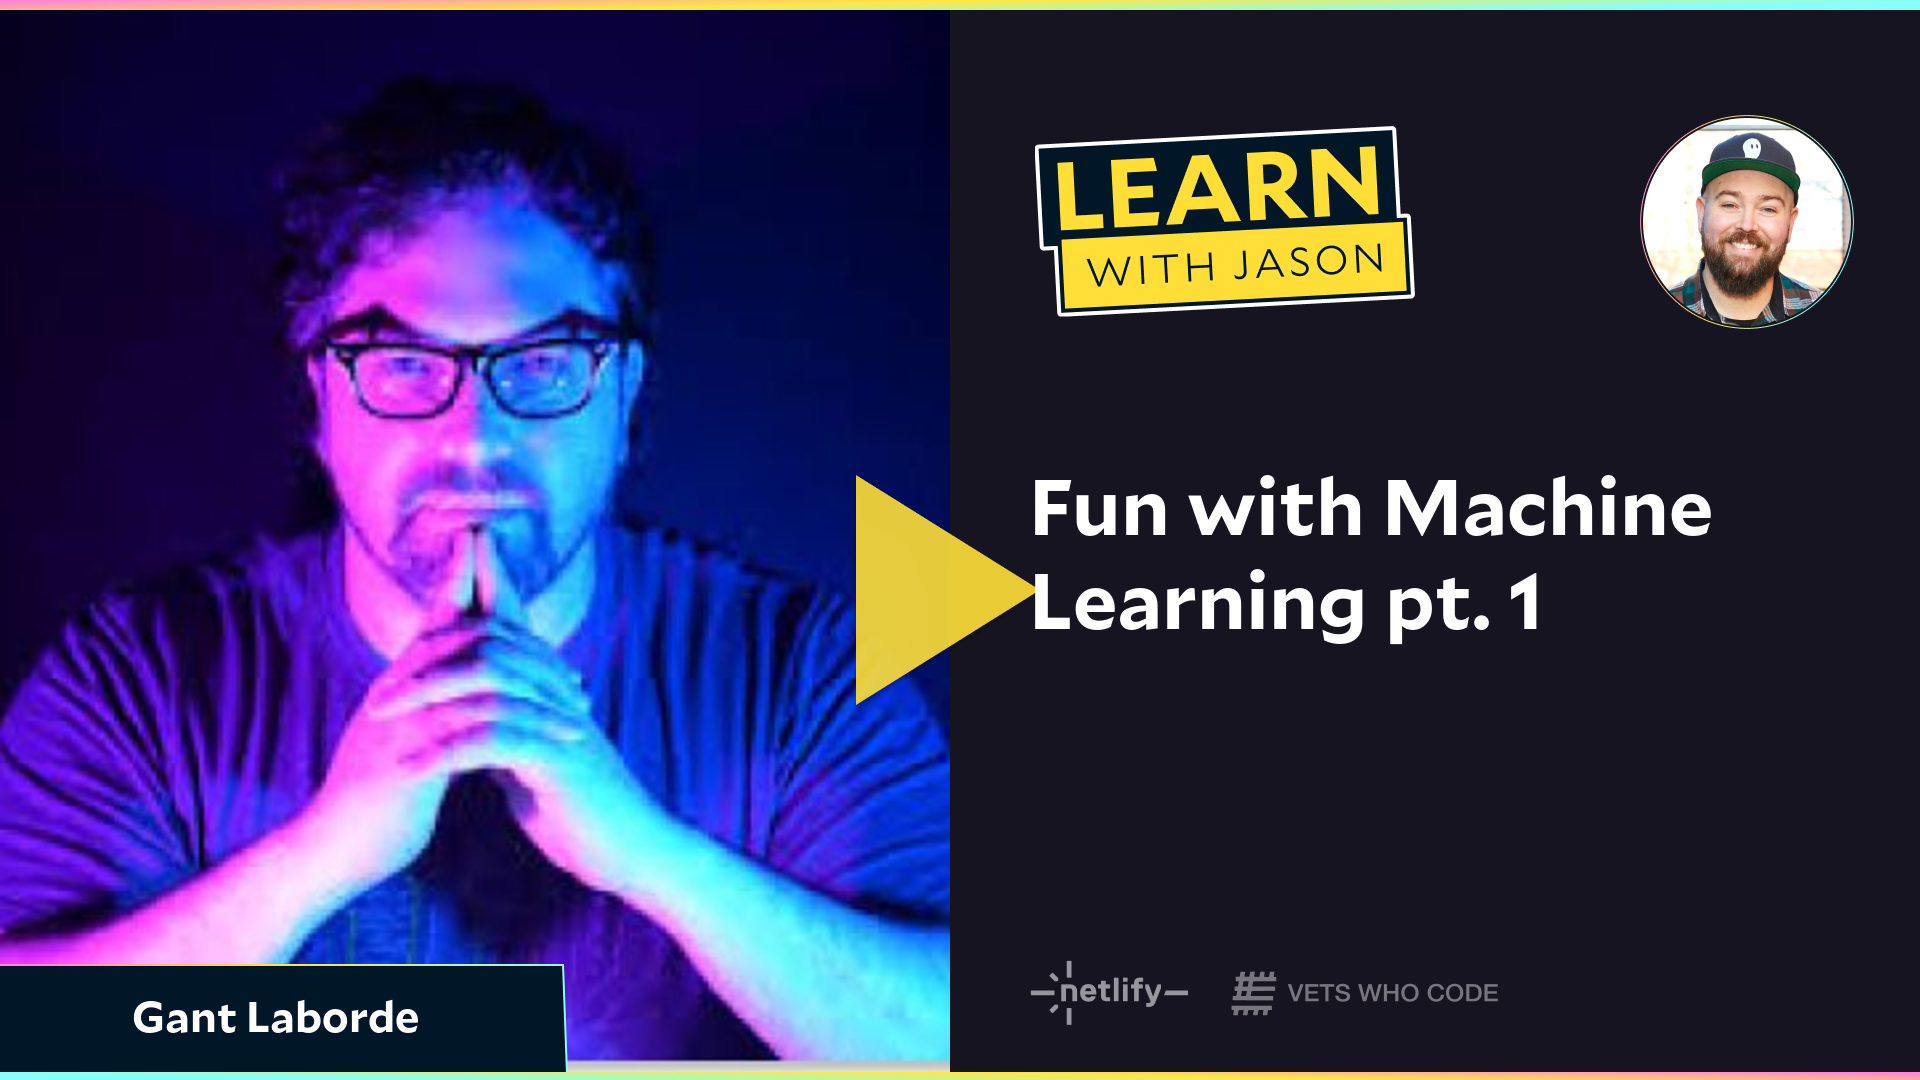 Fun with Machine Learning pt. 1 (with Gant Laborde)